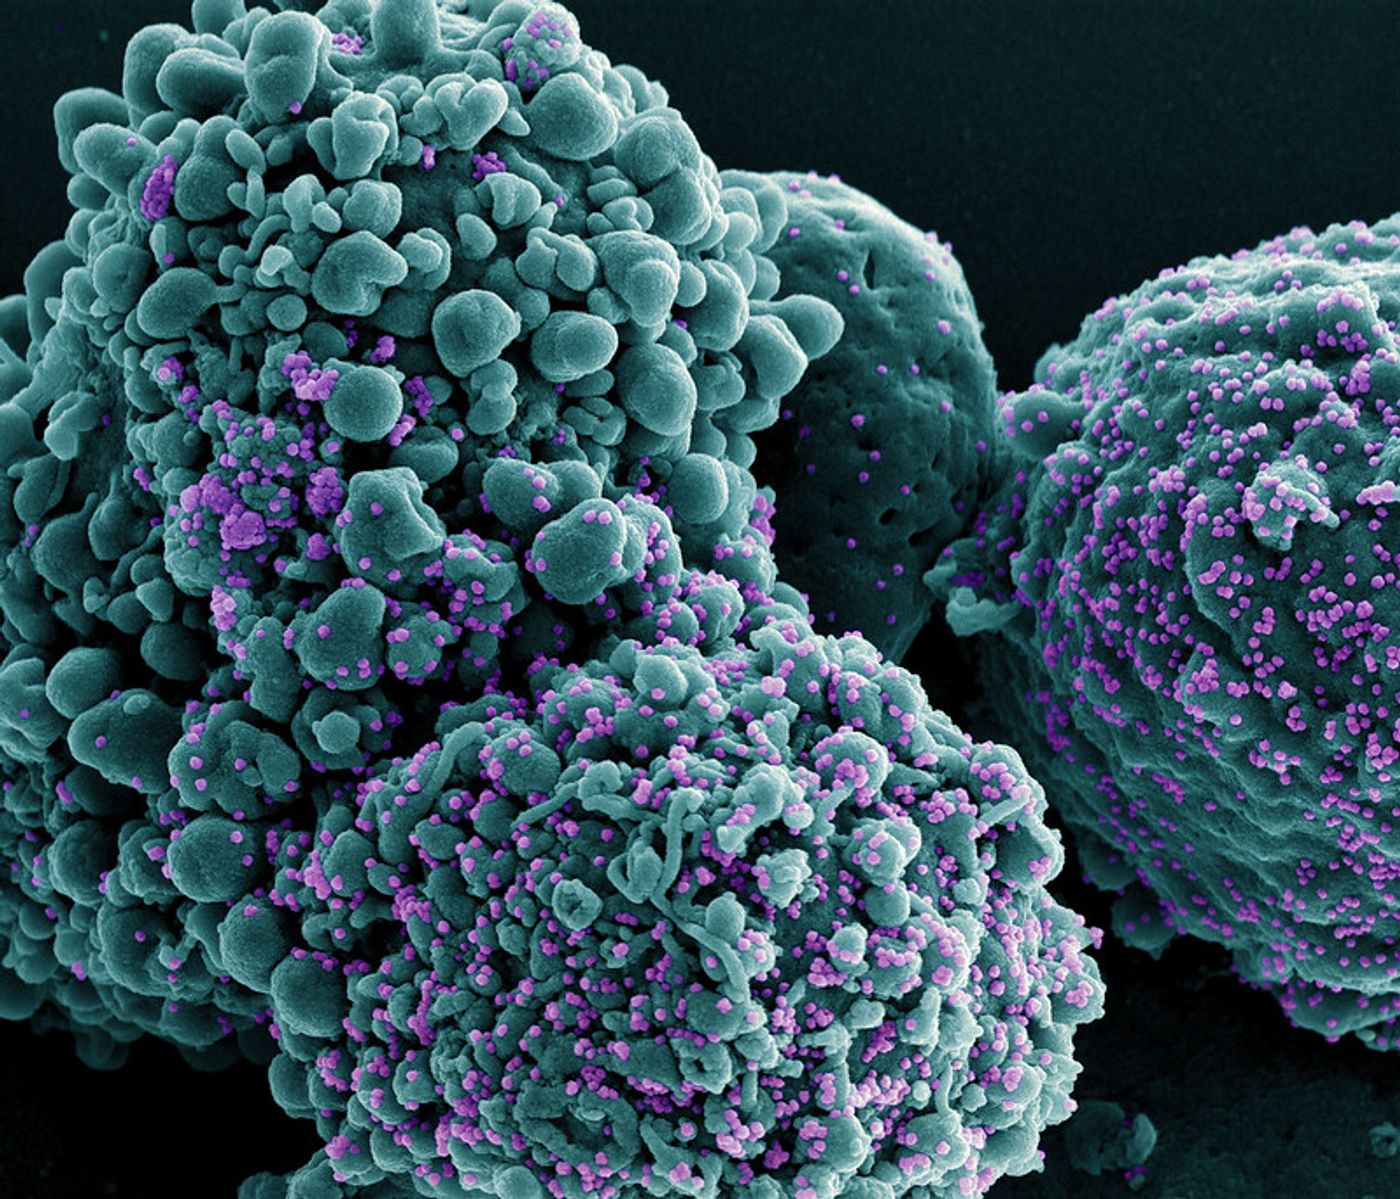 Colorized scanning electron micrograph of a cell infected with the Omicron strain of SARS-CoV-2 virus particles (purple), isolated from a patient sample. Image captured at the NIAID Integrated Research Facility (IRF) in Fort Detrick, Maryland. Credit: NIAID